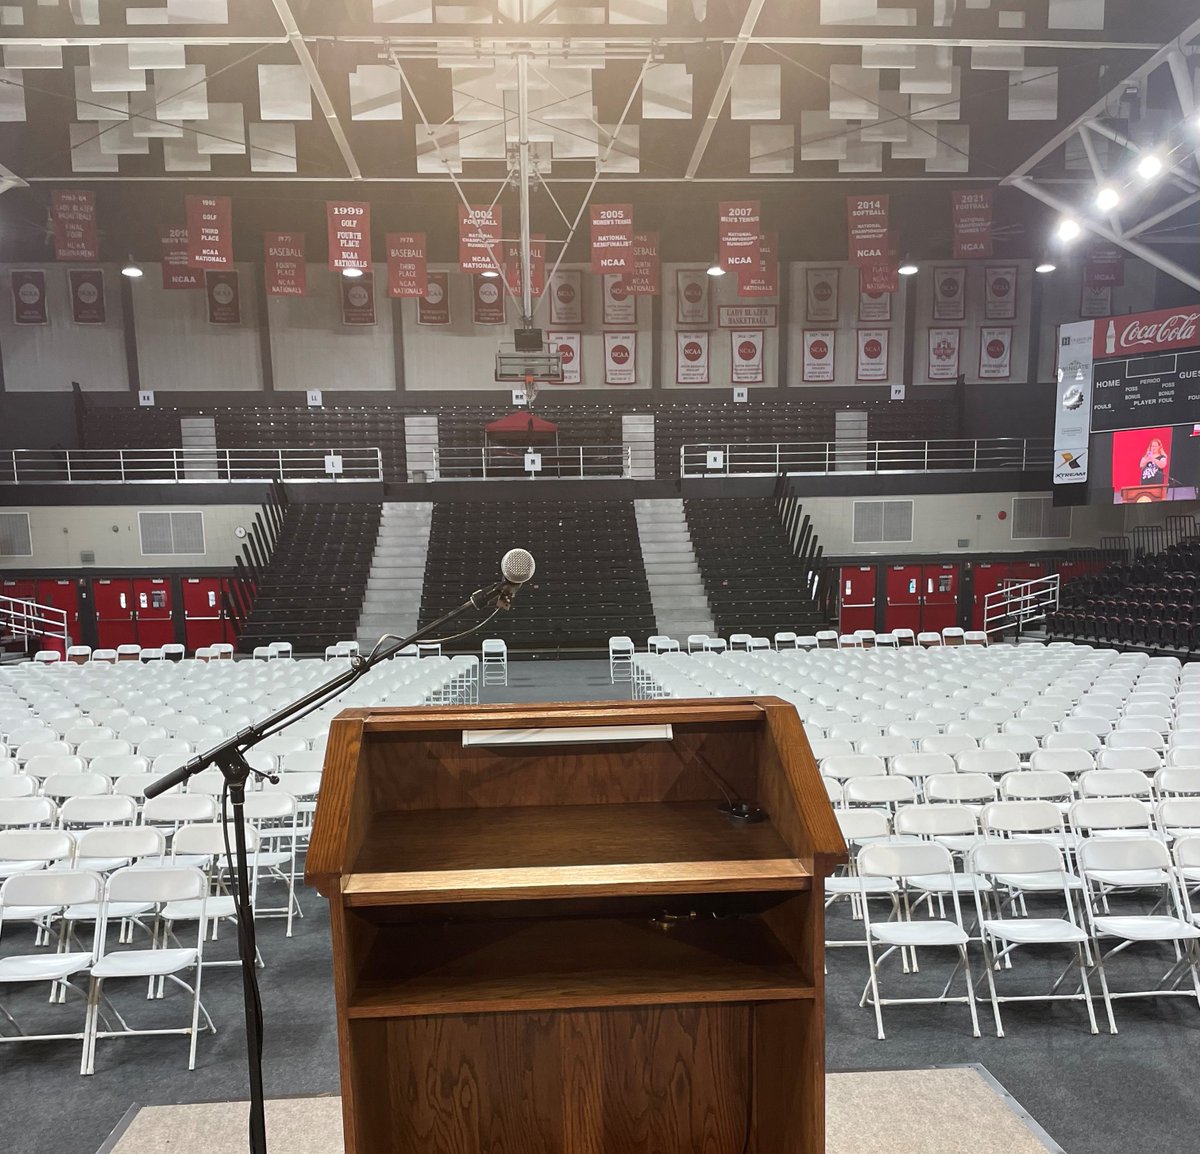 The PE Complex is set up and ready for The Graduate School Commencement this evening. We are ready to celebrate the Class of 2024! #VStateGrad 🎓